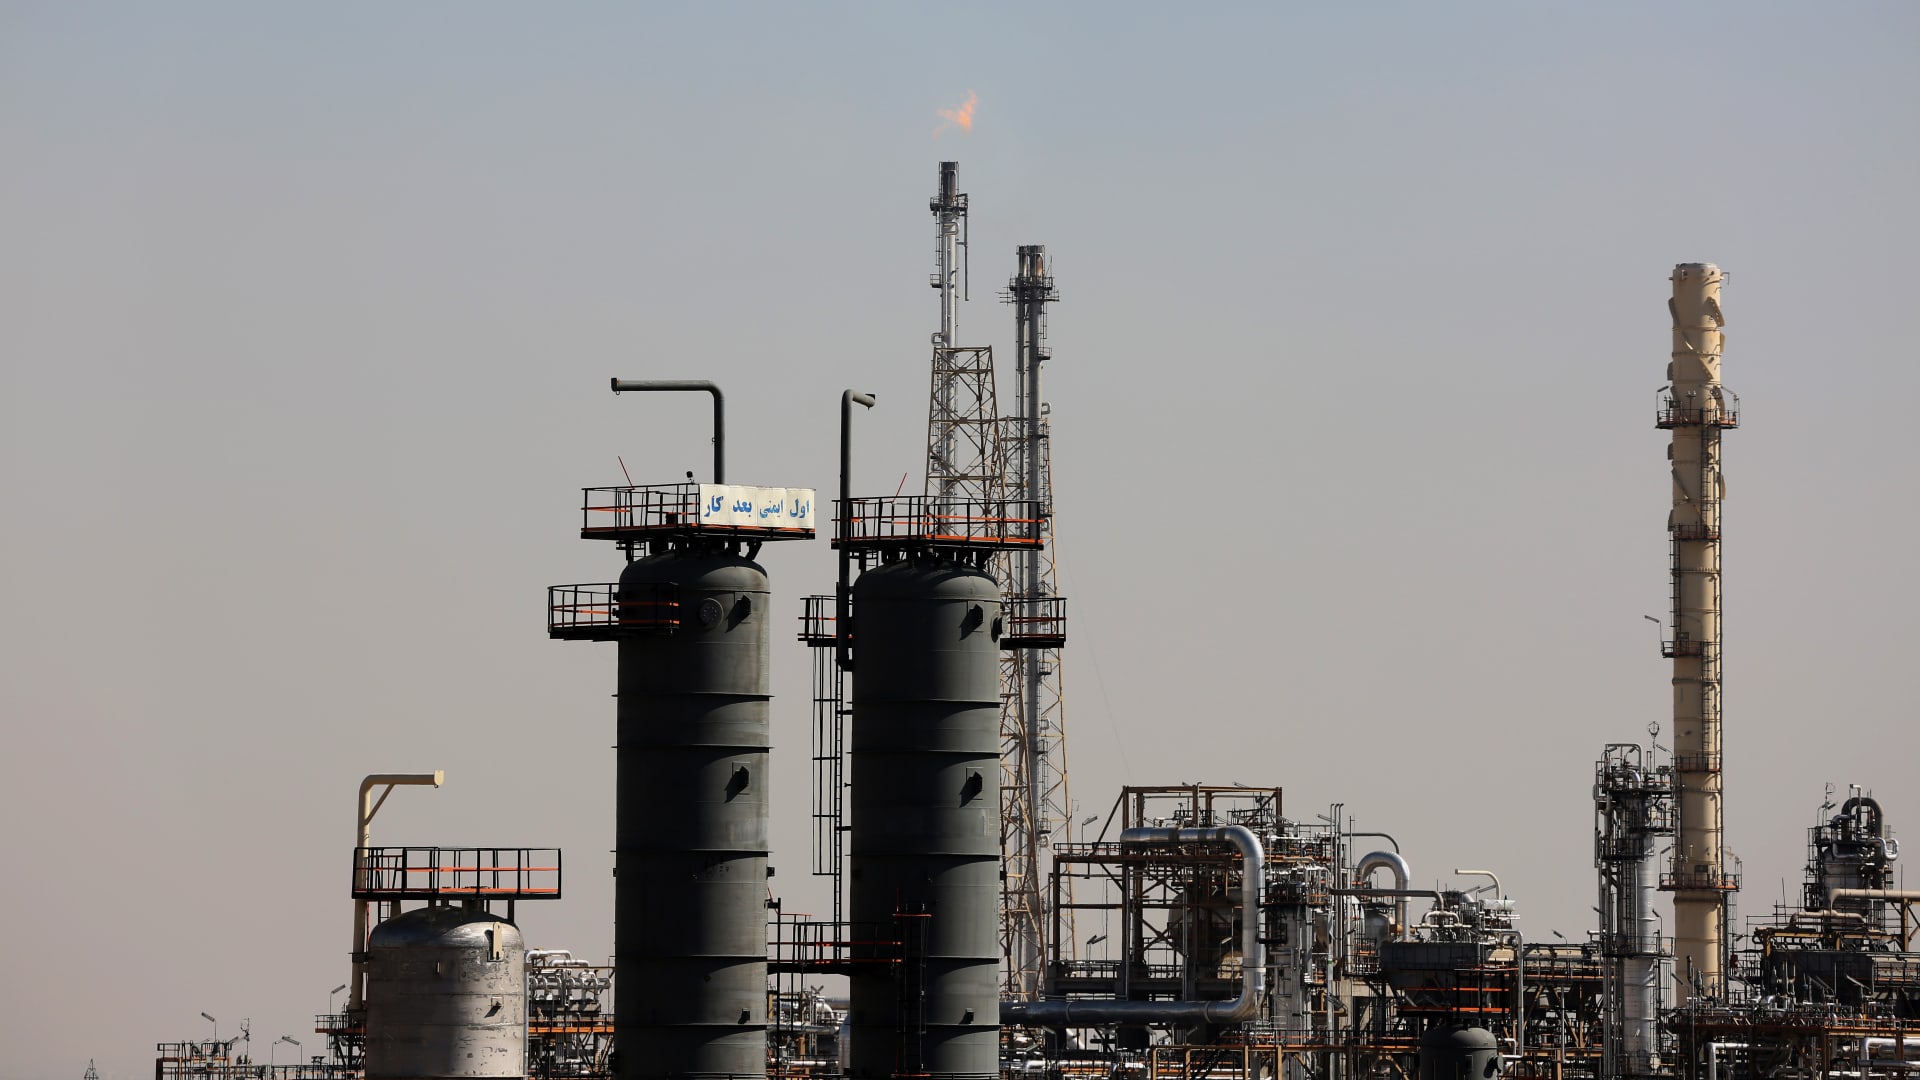 Middle East escalation could trigger oil price shock that fuels inflation, World Bank warns